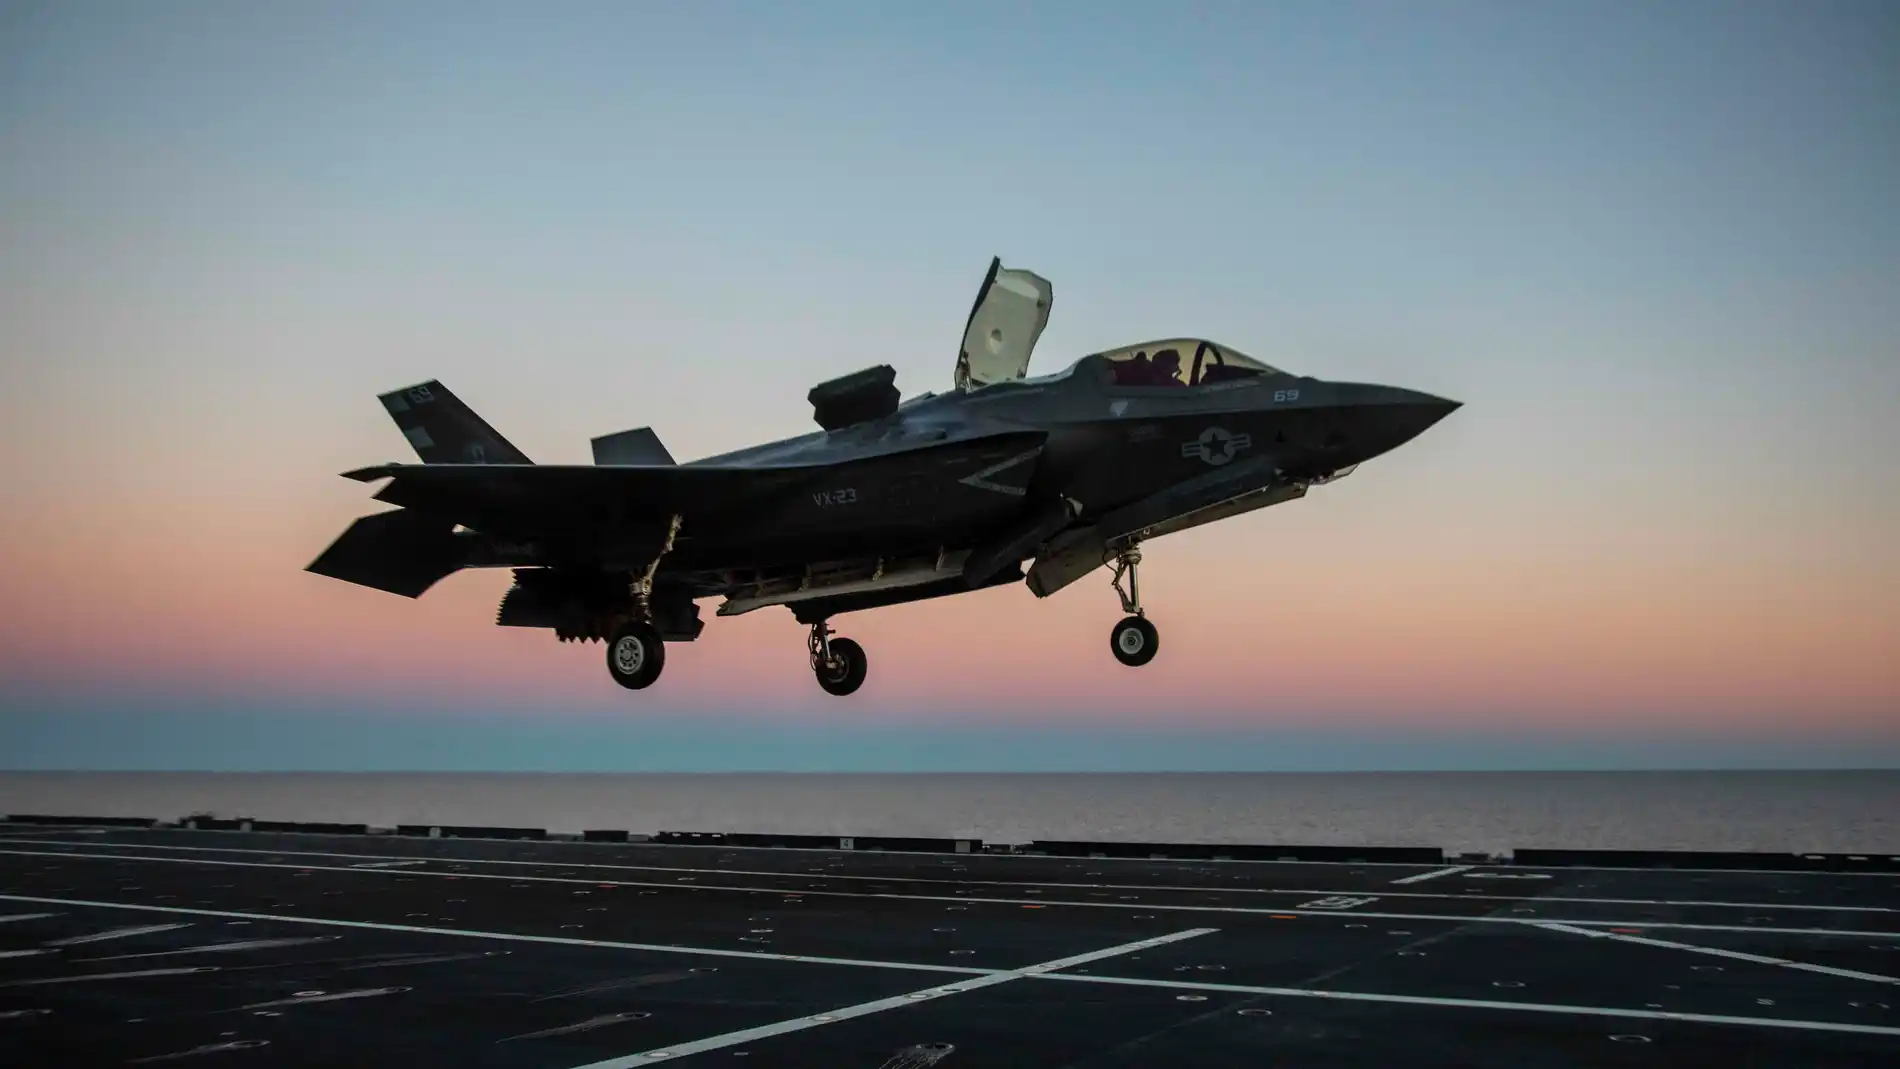 STYLELOCATIONU.S. Marine F-35 stealth fighter test pilot Maj. Brad Leeman performs a vertical landing on the flight deck of the Italian Navy flagship aircraft carrier ITS Cavour during carrier qualifications in the Atlantic Ocean March 7, 2021, off the coast of Norfolk, Virginia. (Foto de ARCHIVO) 07/03/2021